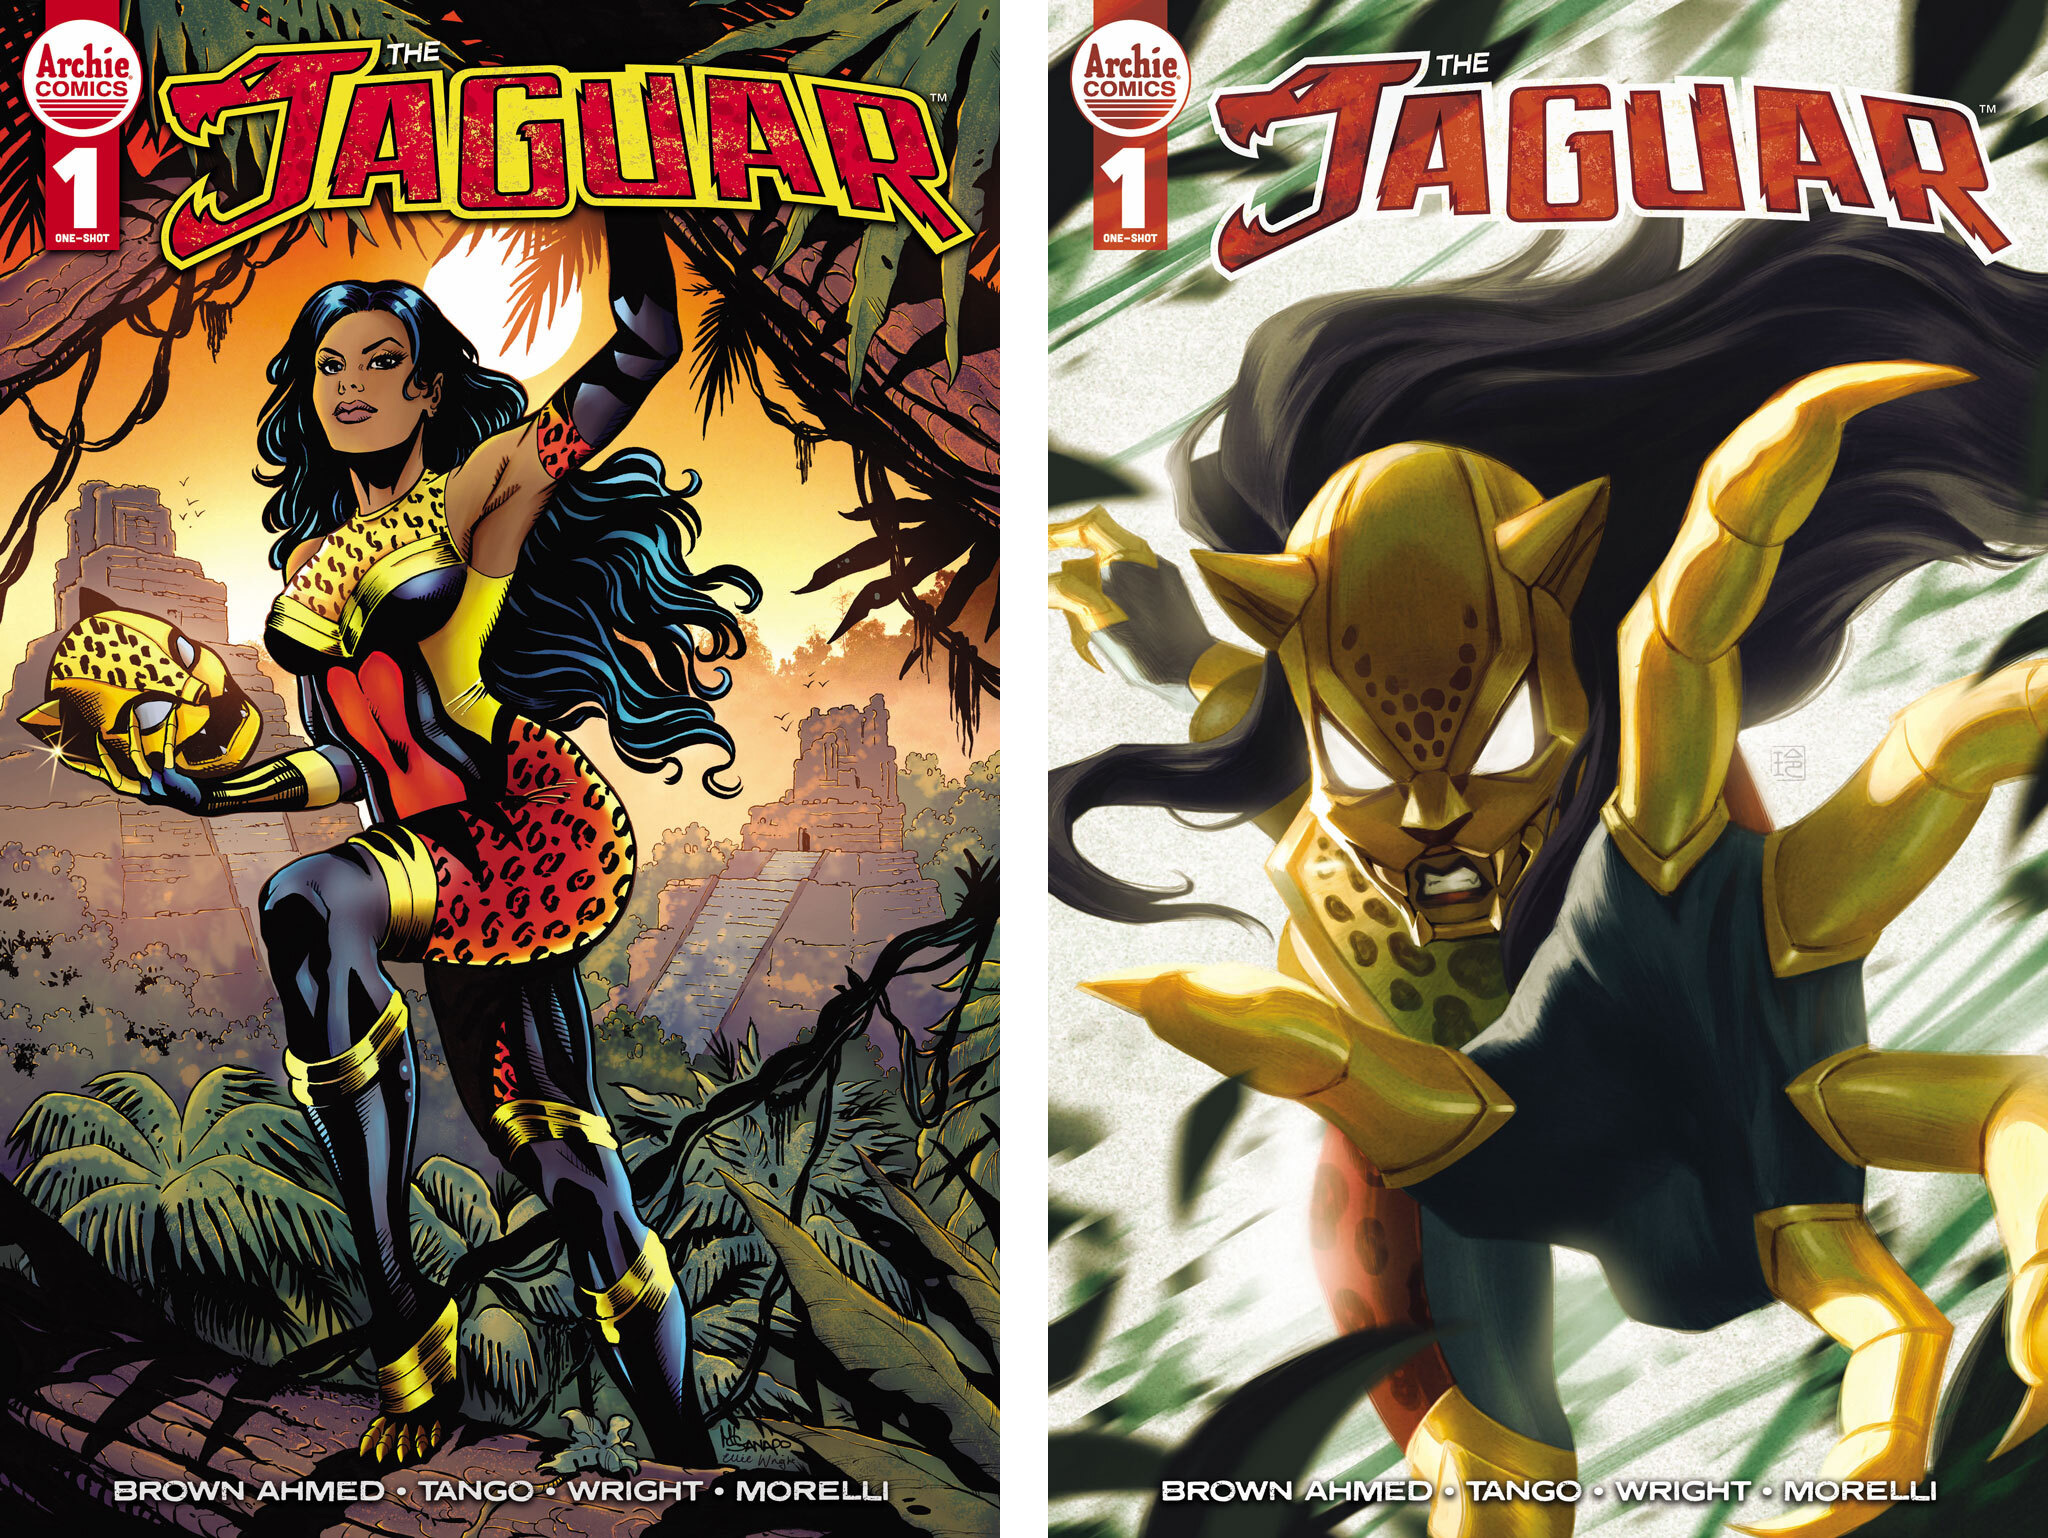 Two covers of THE JAGUAR comic book, both featuring the superhero The Jaguar in a jungle, leaping into action.